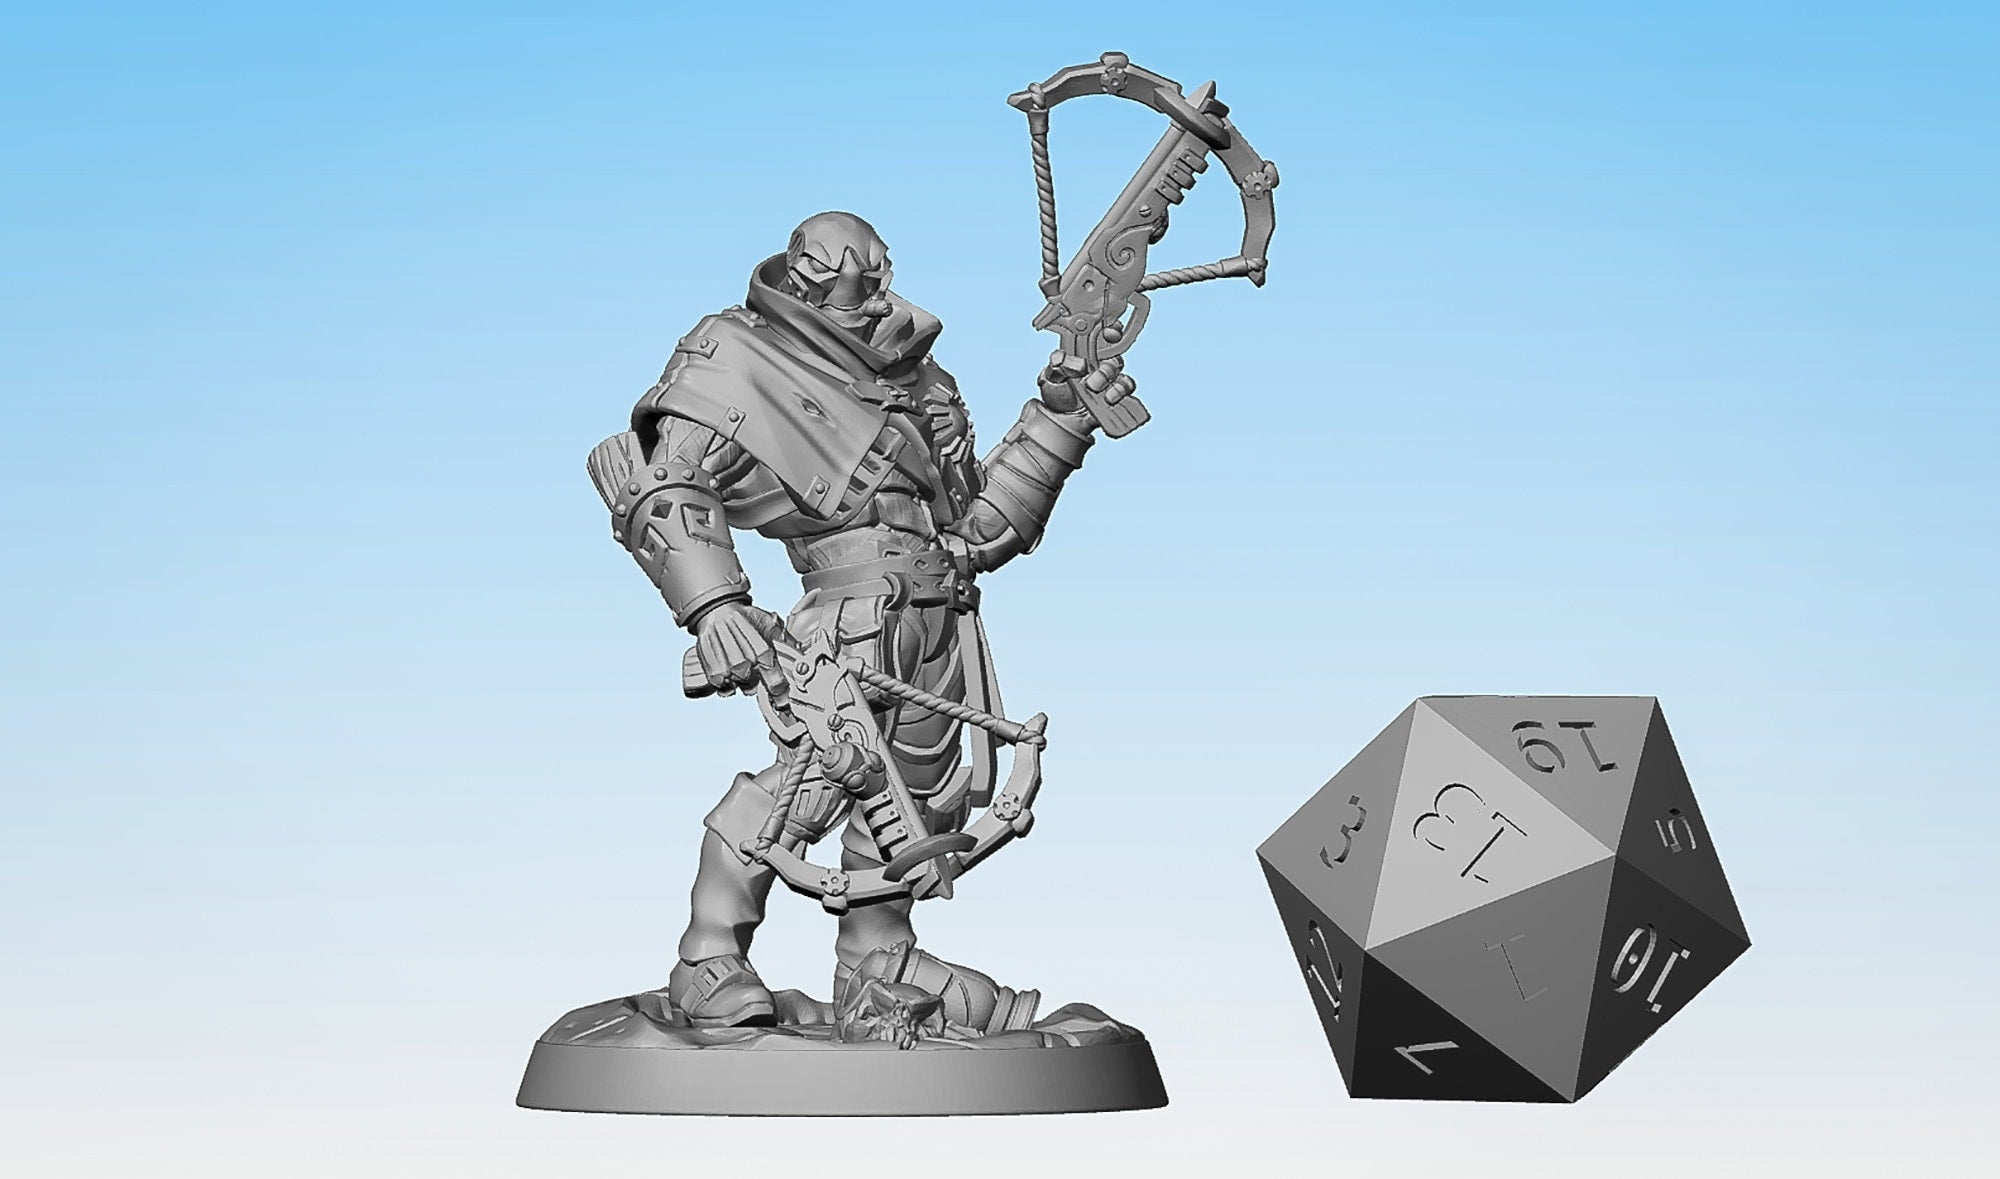 WARFORGED "Clay Westwood" (Double-Crossbows)-Role Playing Miniatures